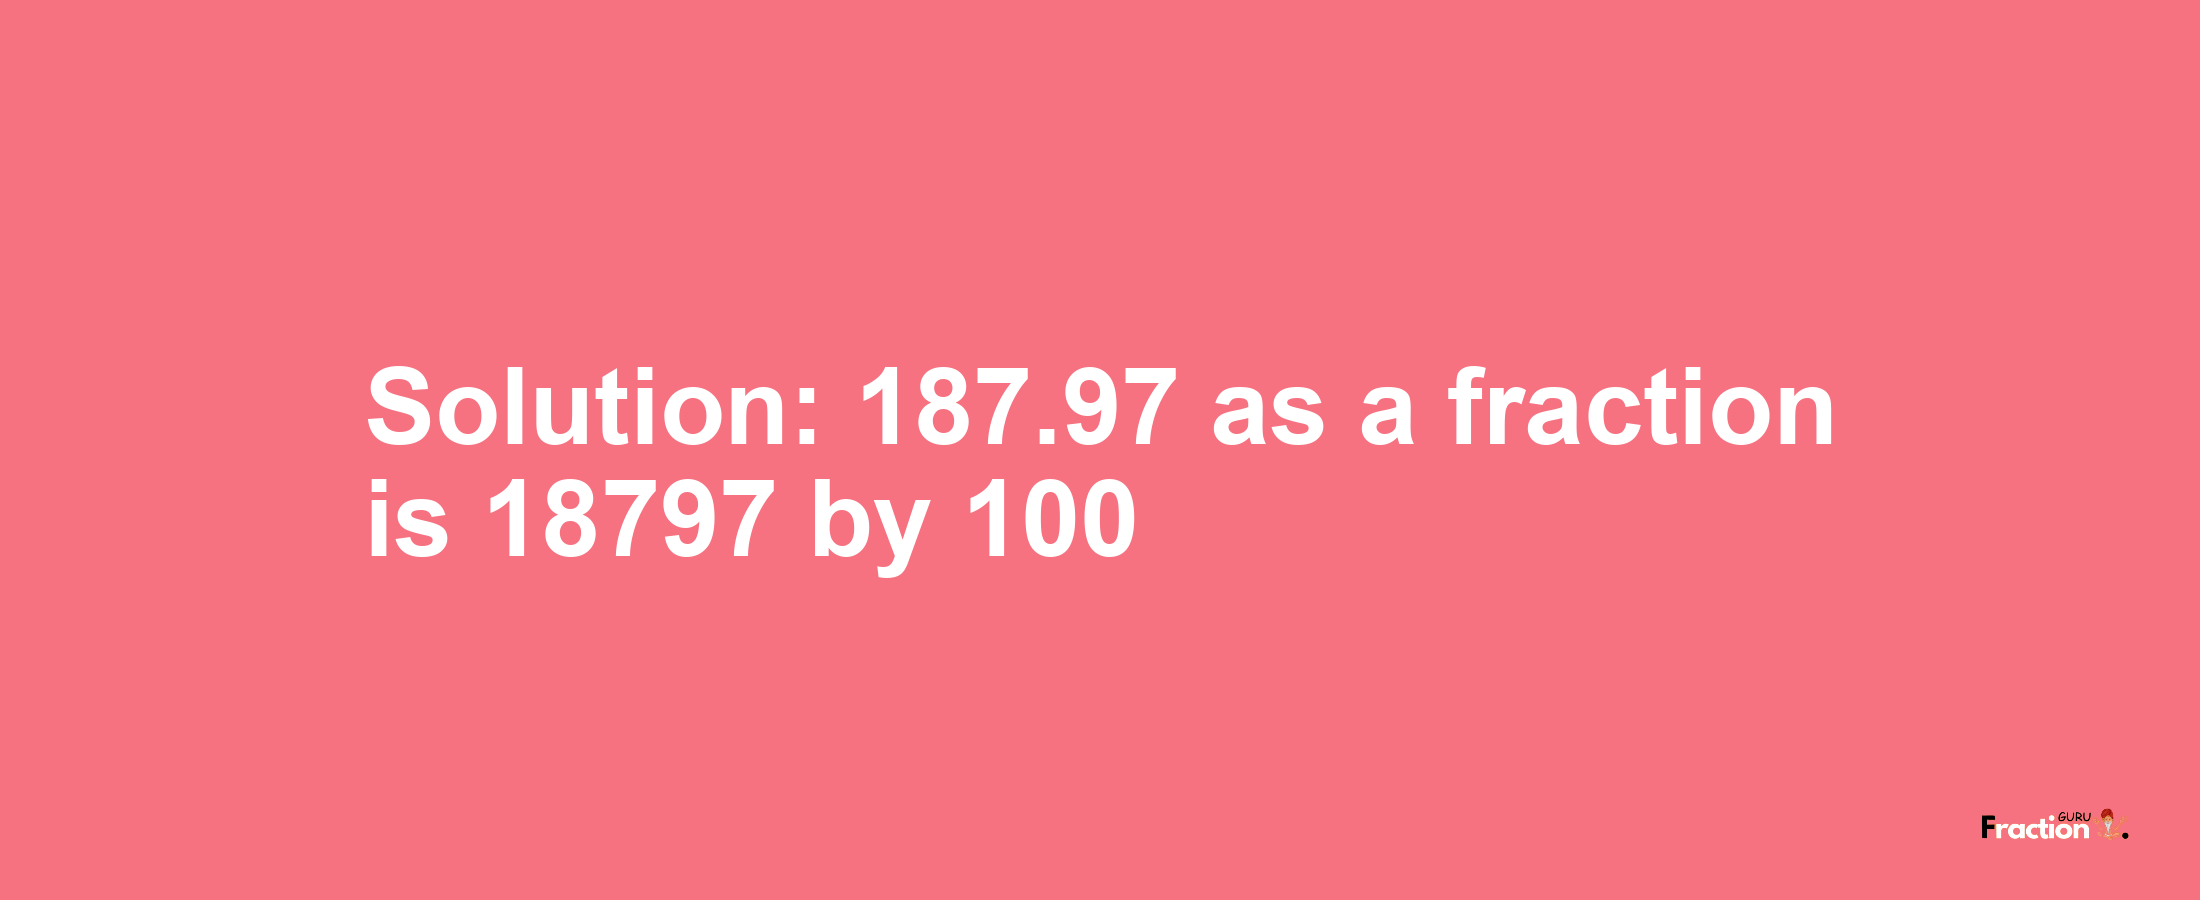 Solution:187.97 as a fraction is 18797/100